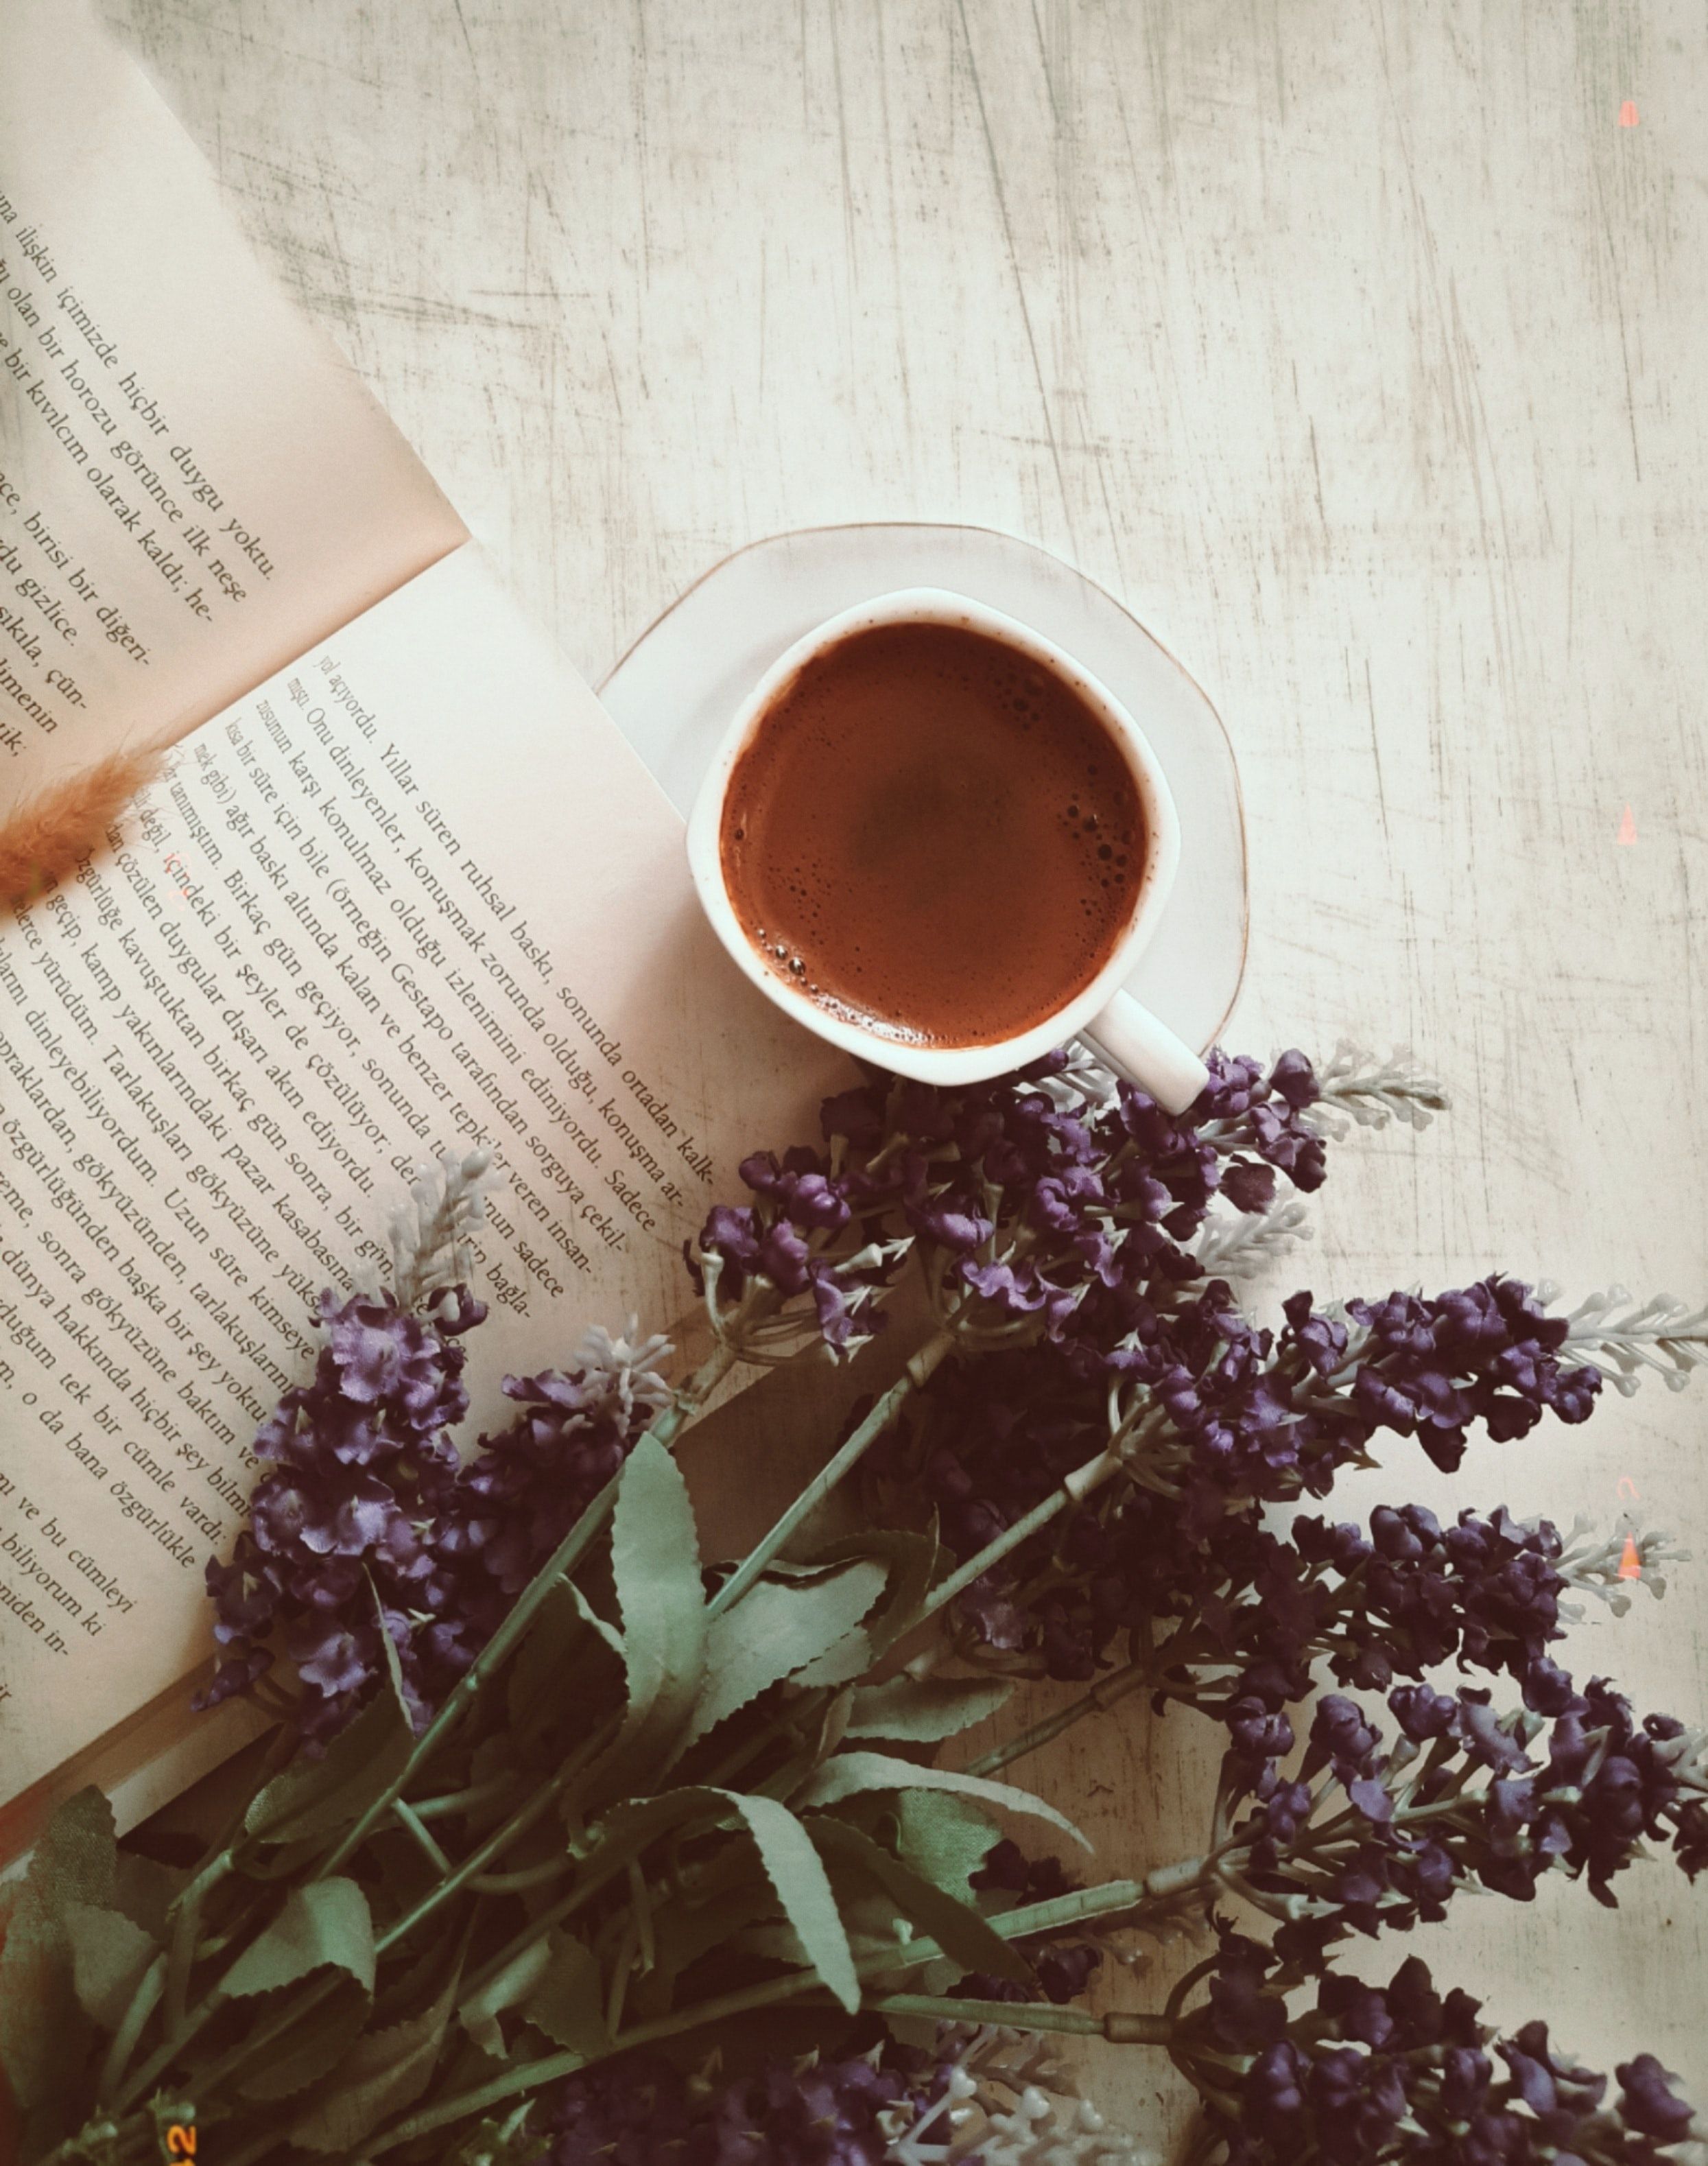 Download wallpaper 2490x3157 coffee, cup, book, flowers, text HD background